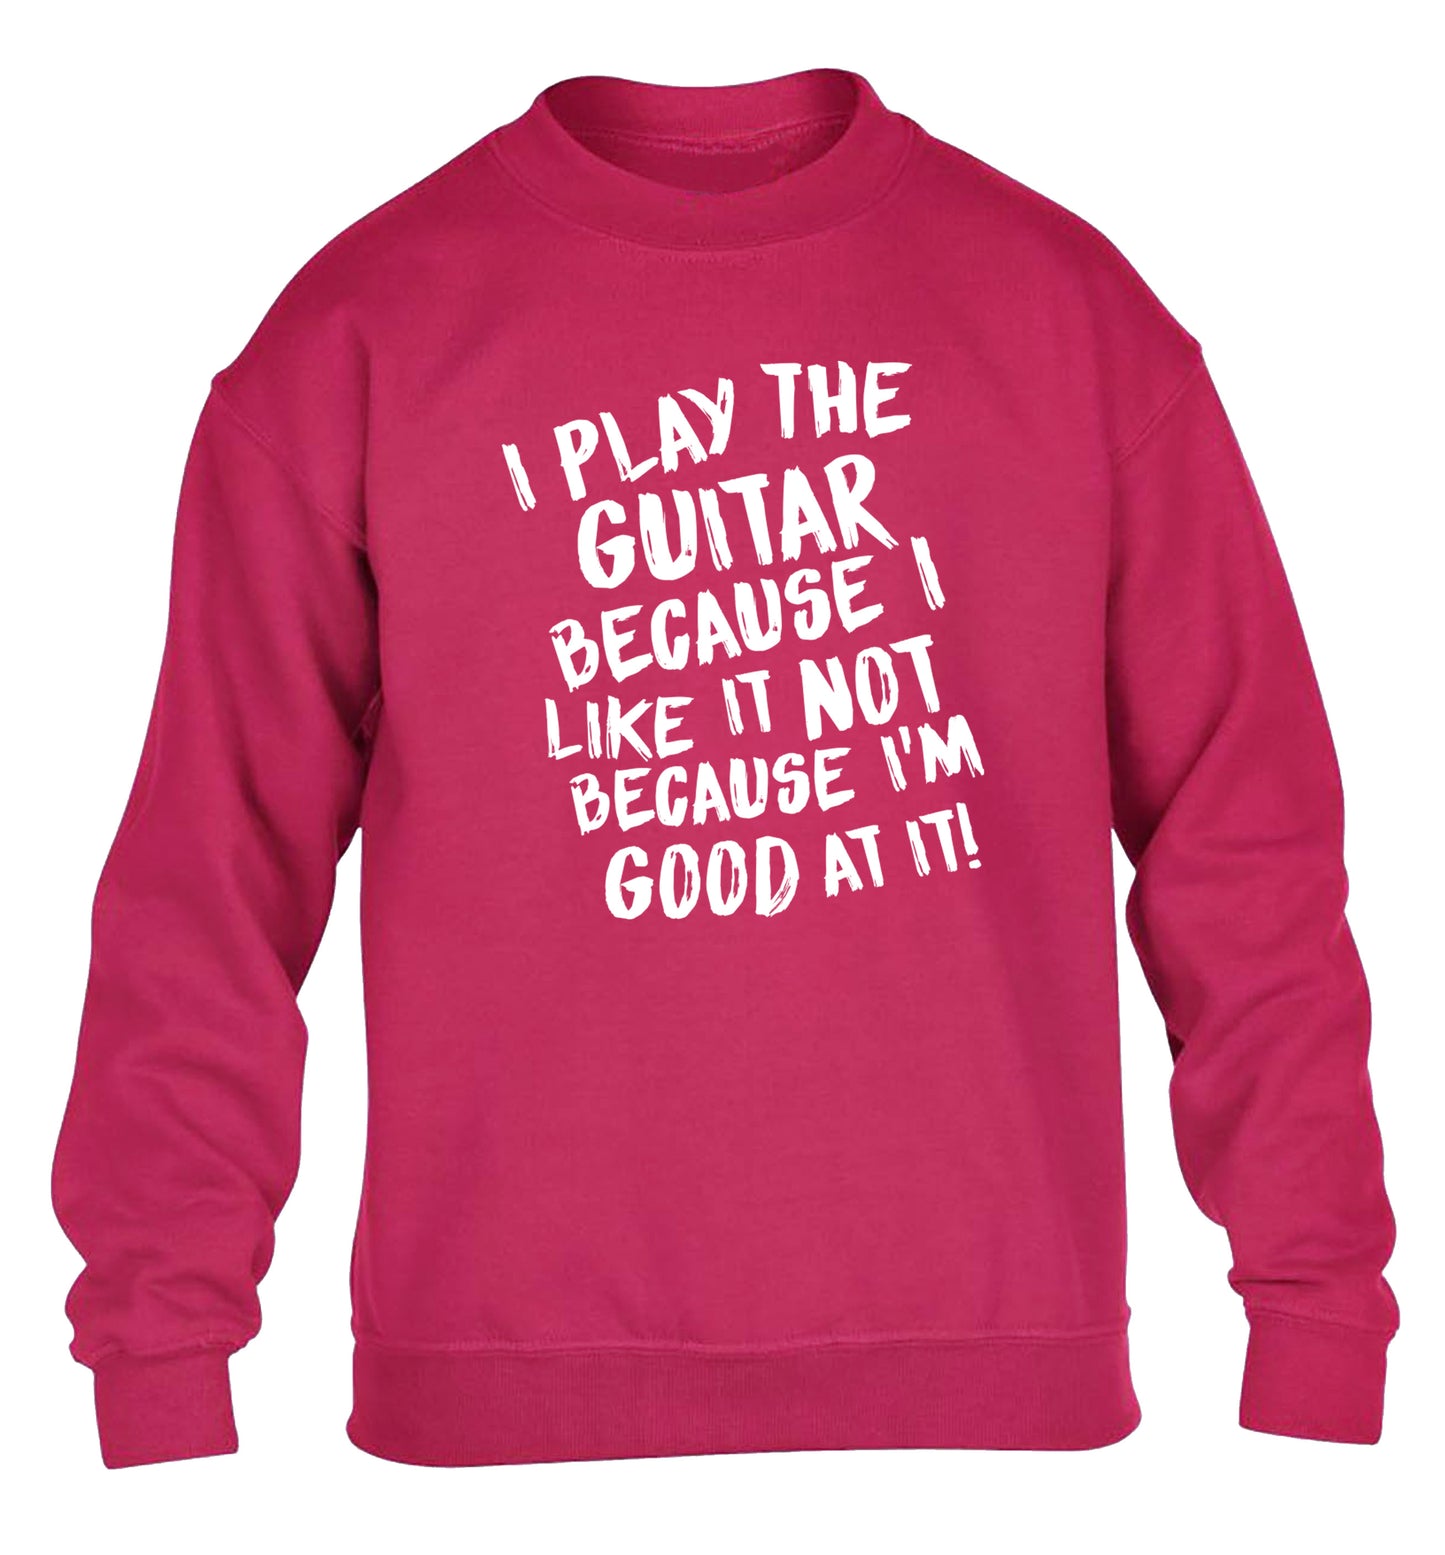 I play the guitar because I like it not because I'm good at it children's pink sweater 12-14 Years